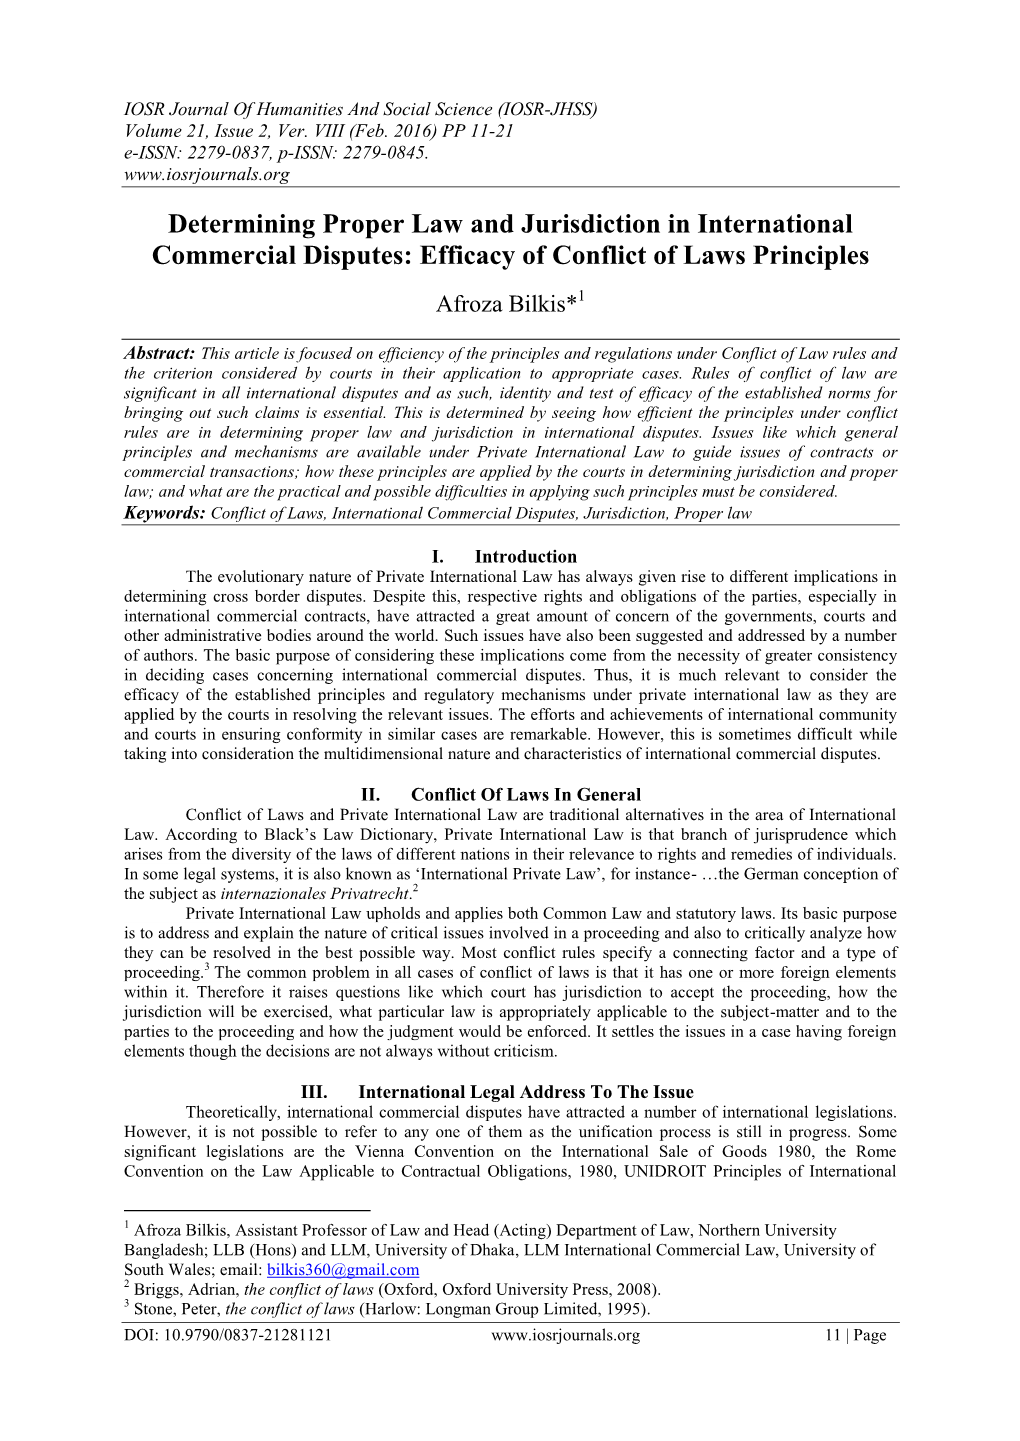 Determining Proper Law and Jurisdiction in International Commercial Disputes: Efficacy of Conflict of Laws Principles